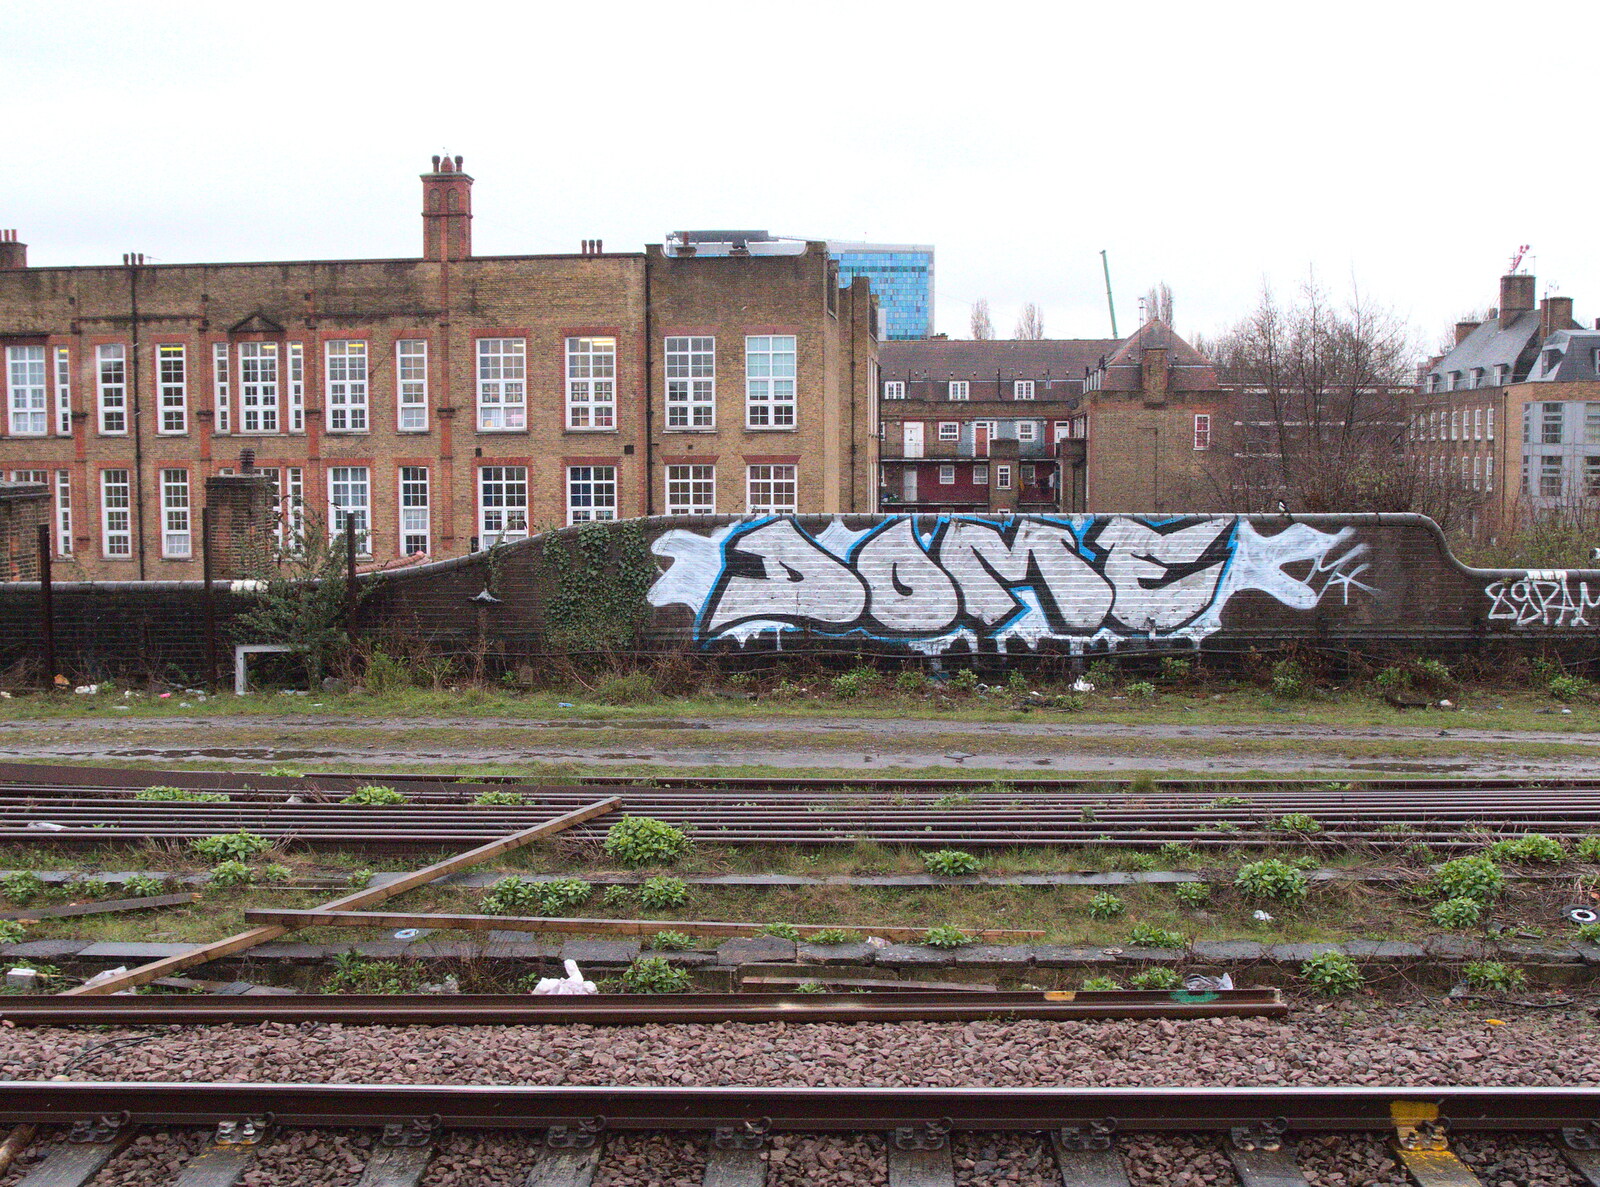 Graffiti from 'Dome' from Trackside Graffiti, and Harry's Cake, London and Suffolk - 28th March 2018